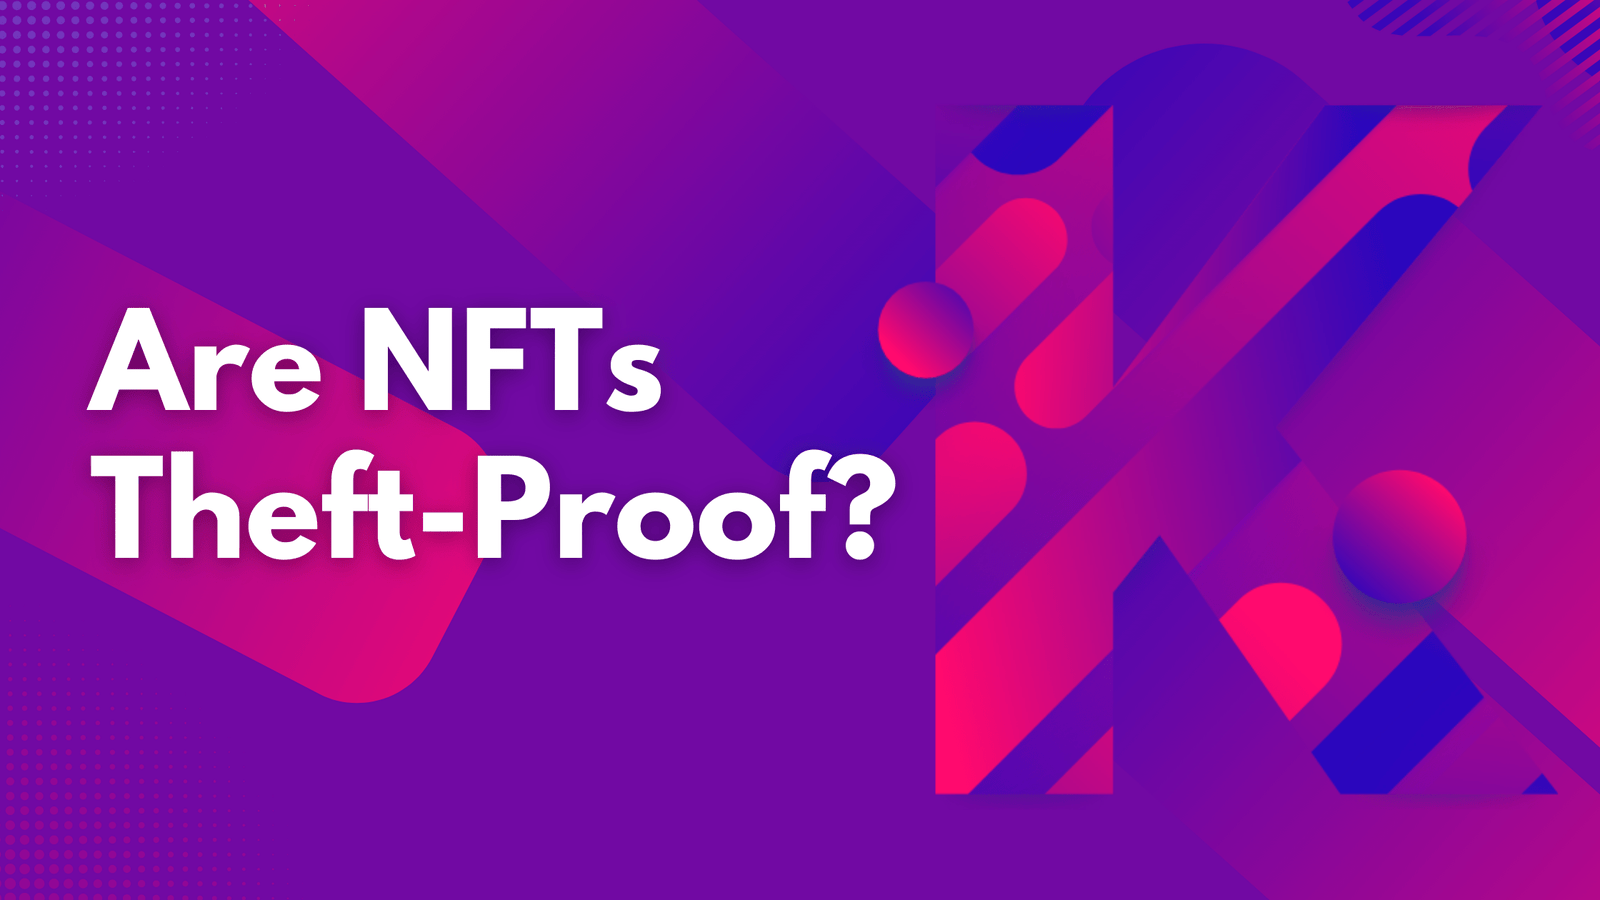 Are NFTs Theft-Proof